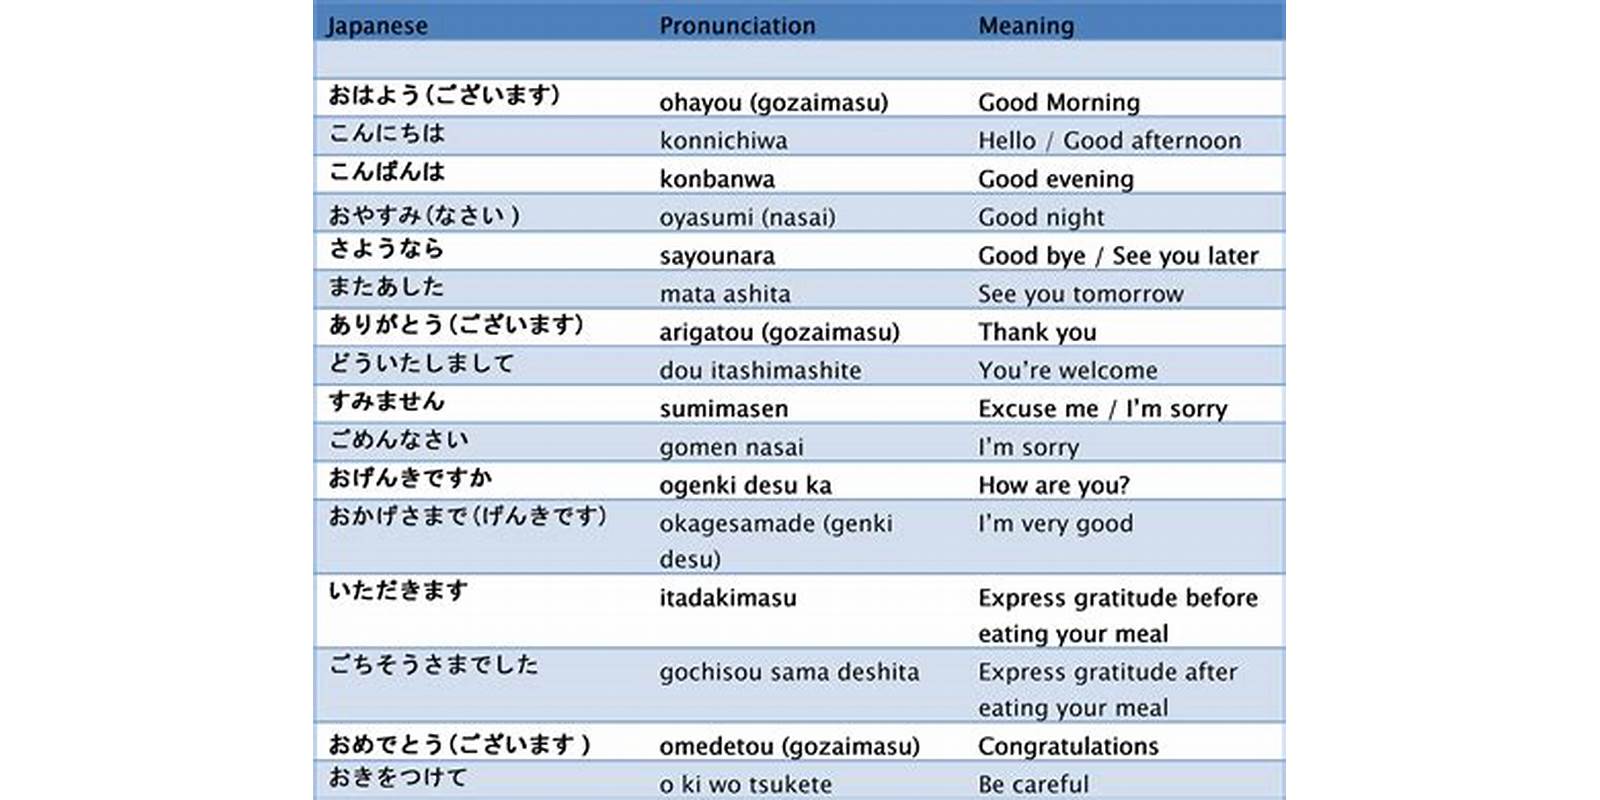 Japanese commands